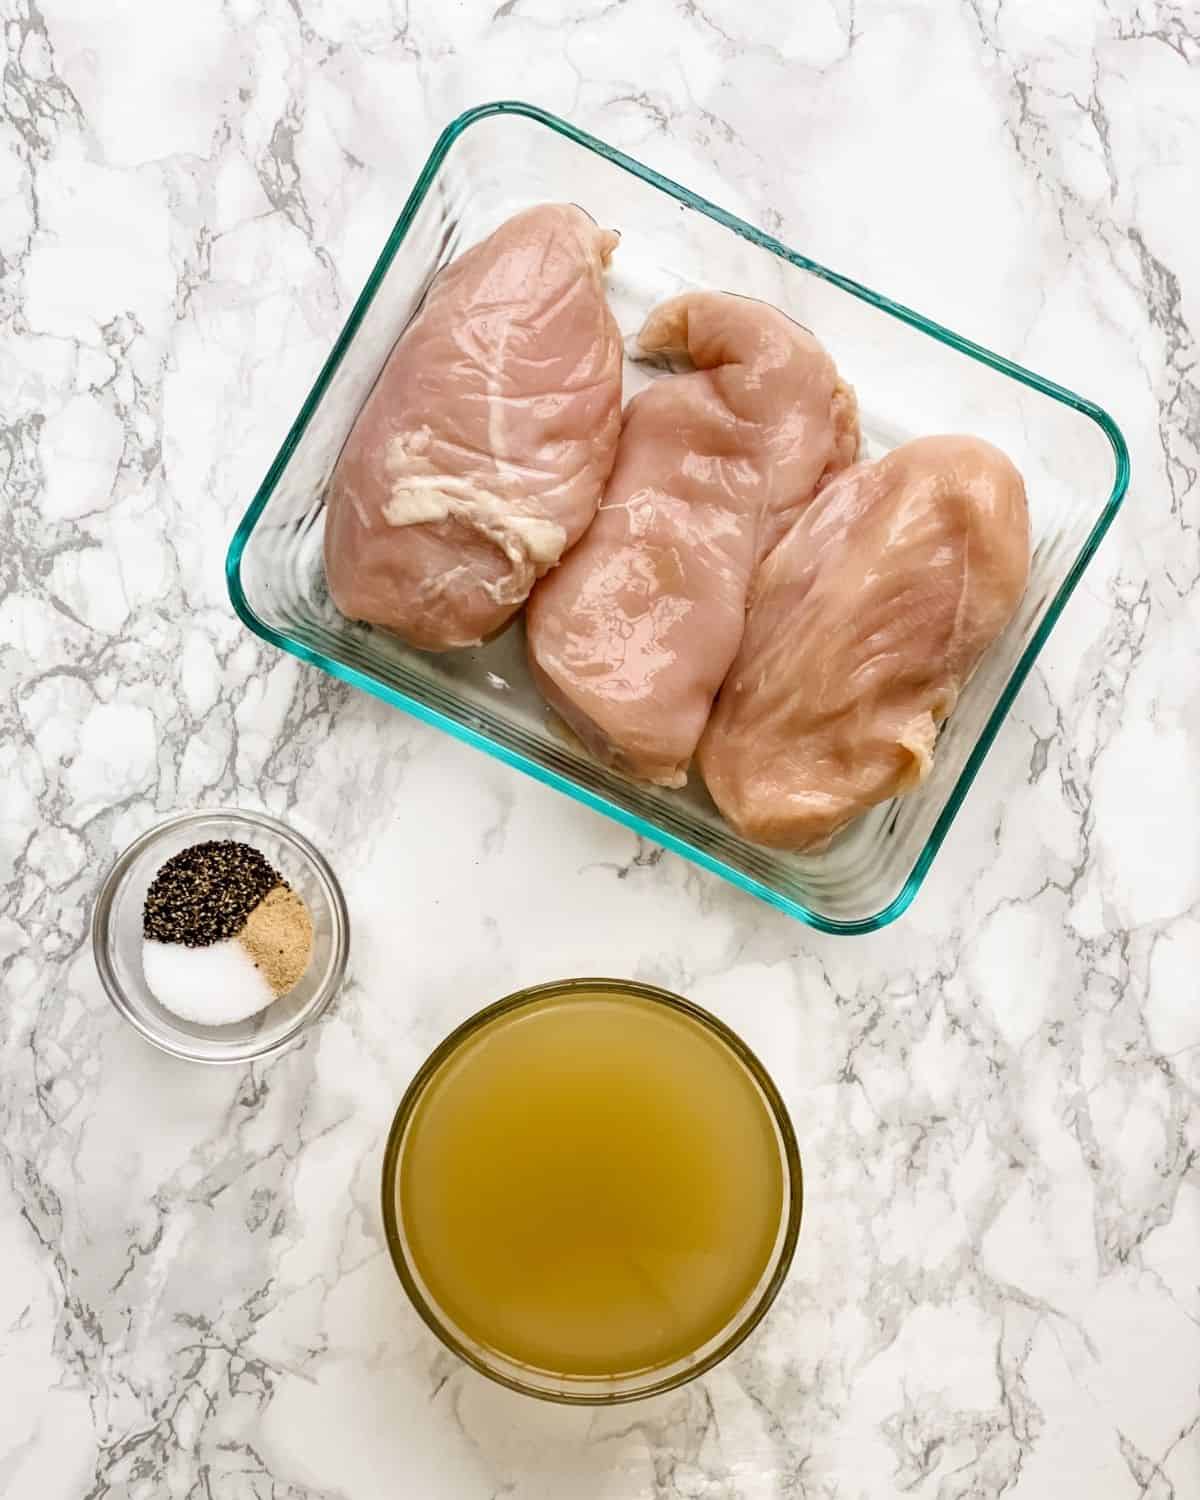 ingredients to make shredded chicken using your crockpot.